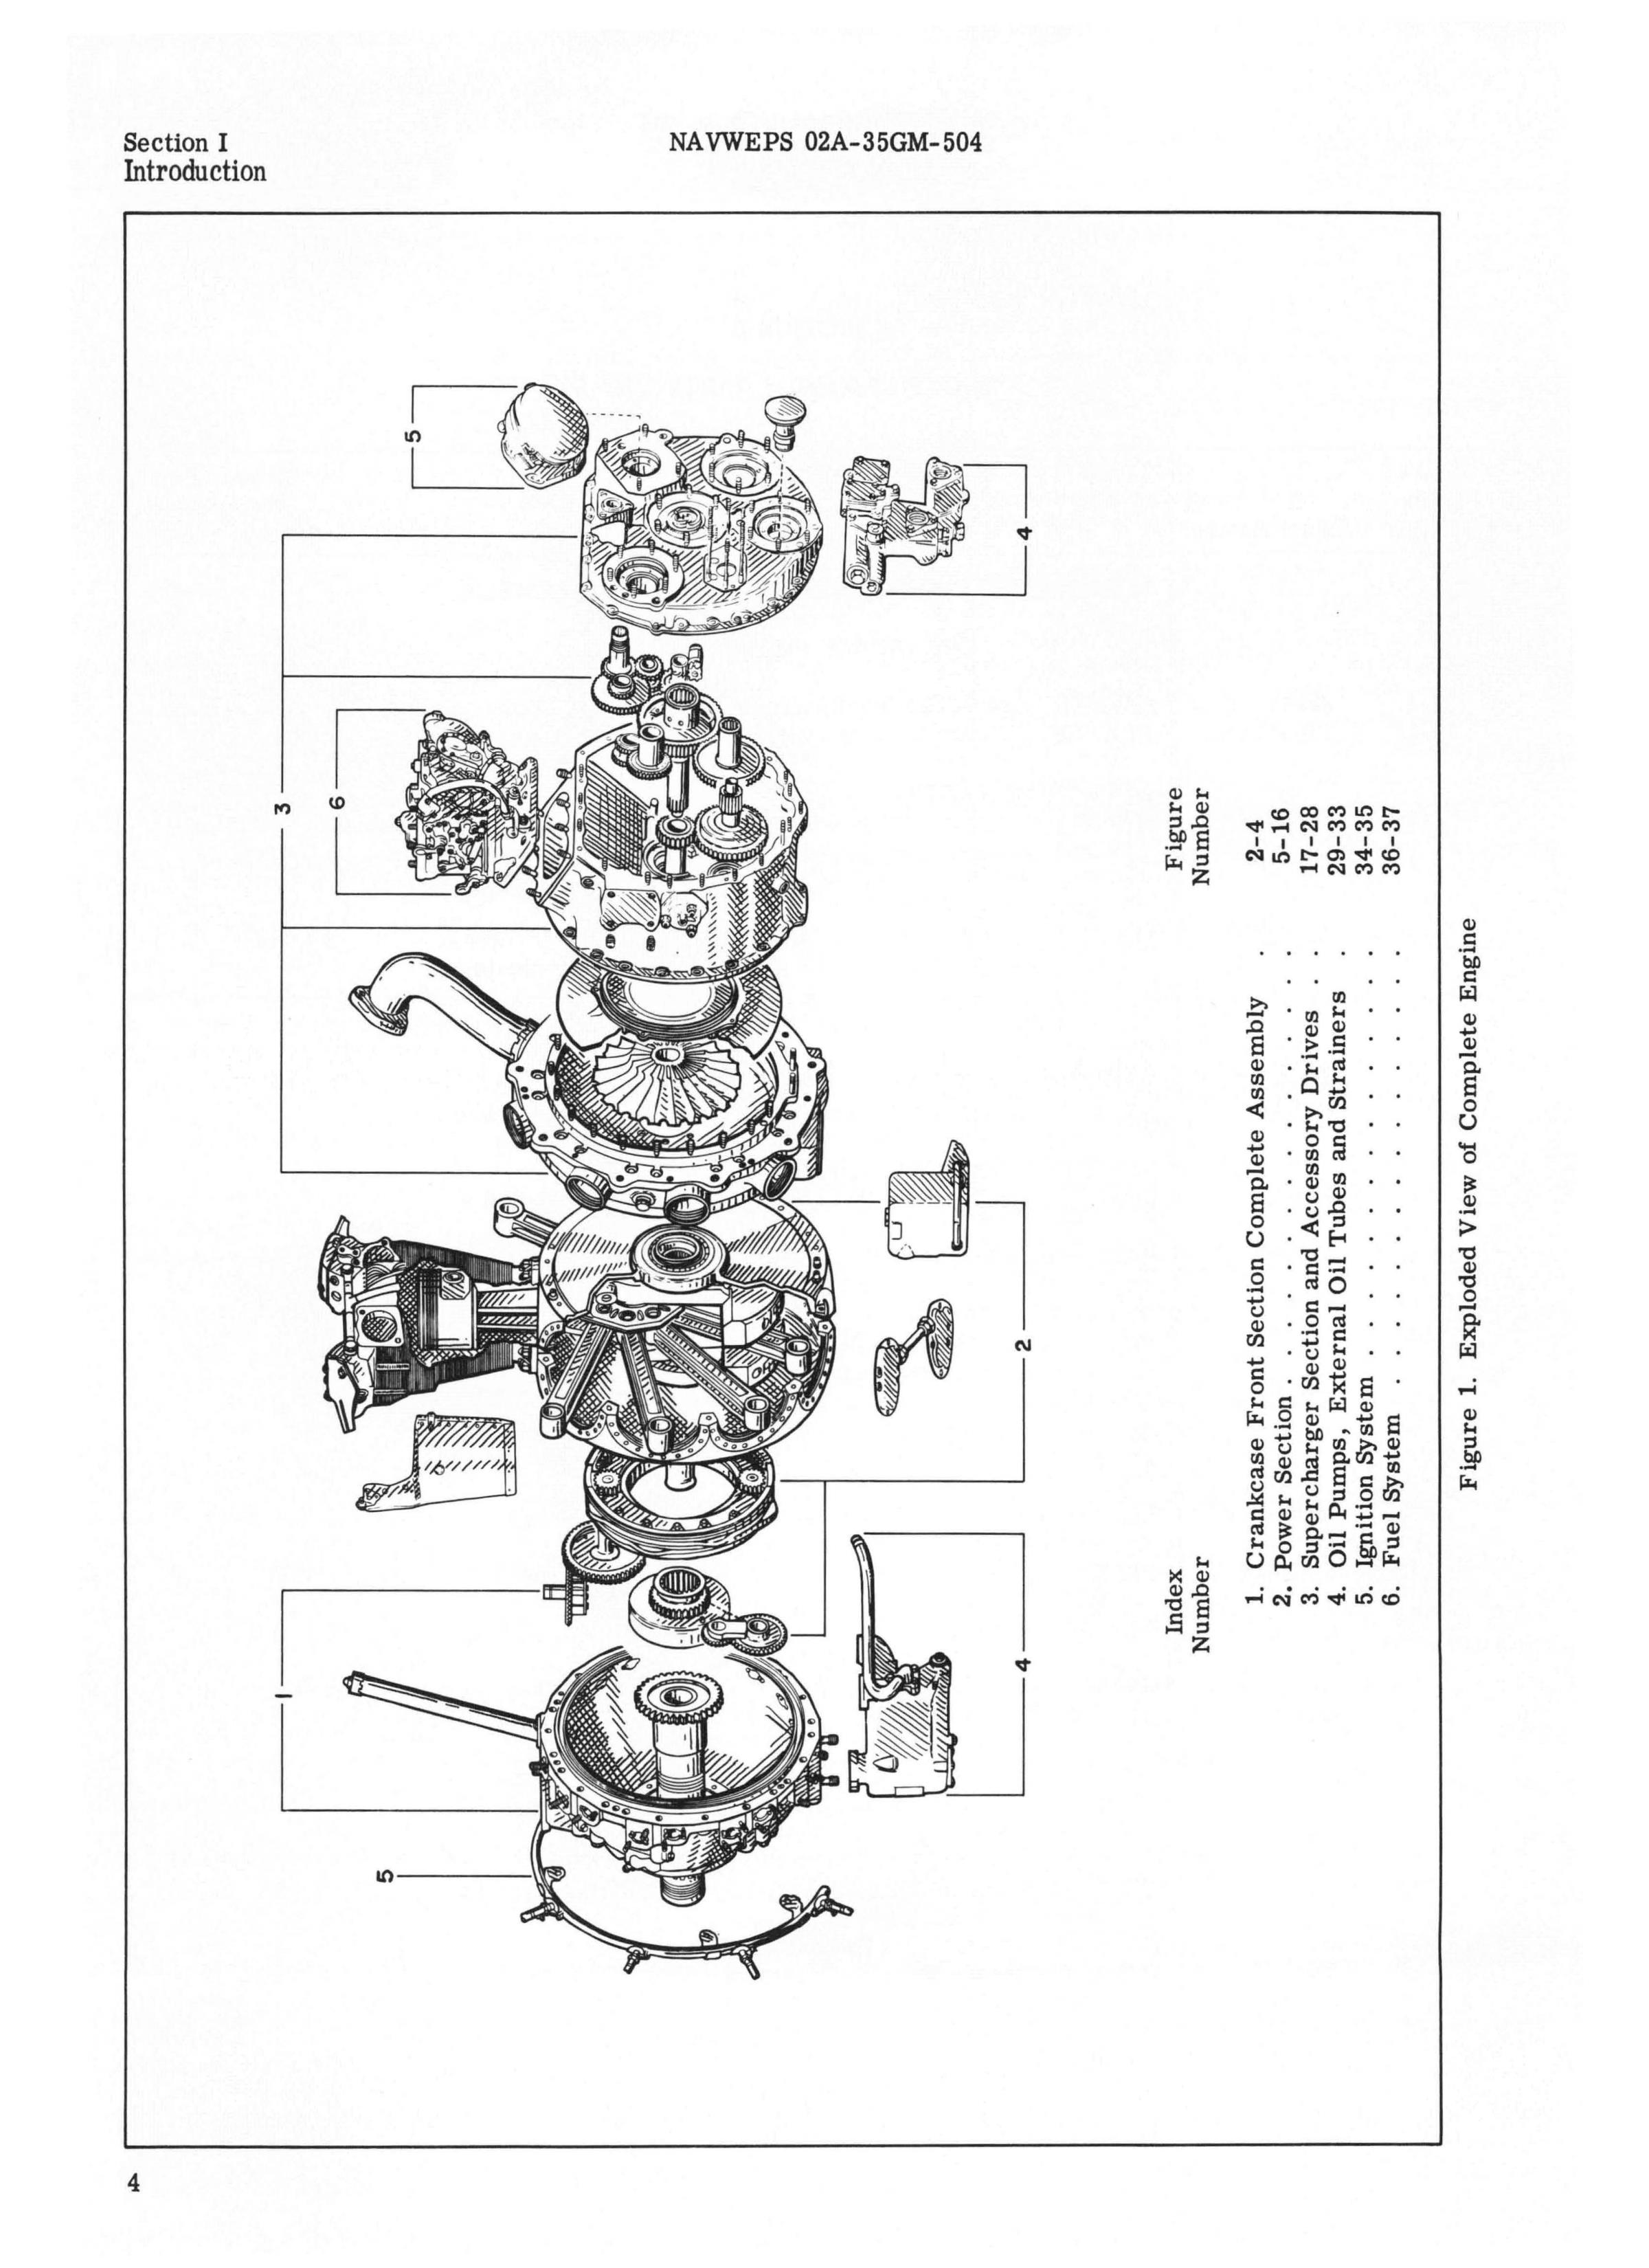 Sample page 10 from AirCorps Library document: Illustrated Parts Breakdown for R1820-84A, B, C, and D Engines